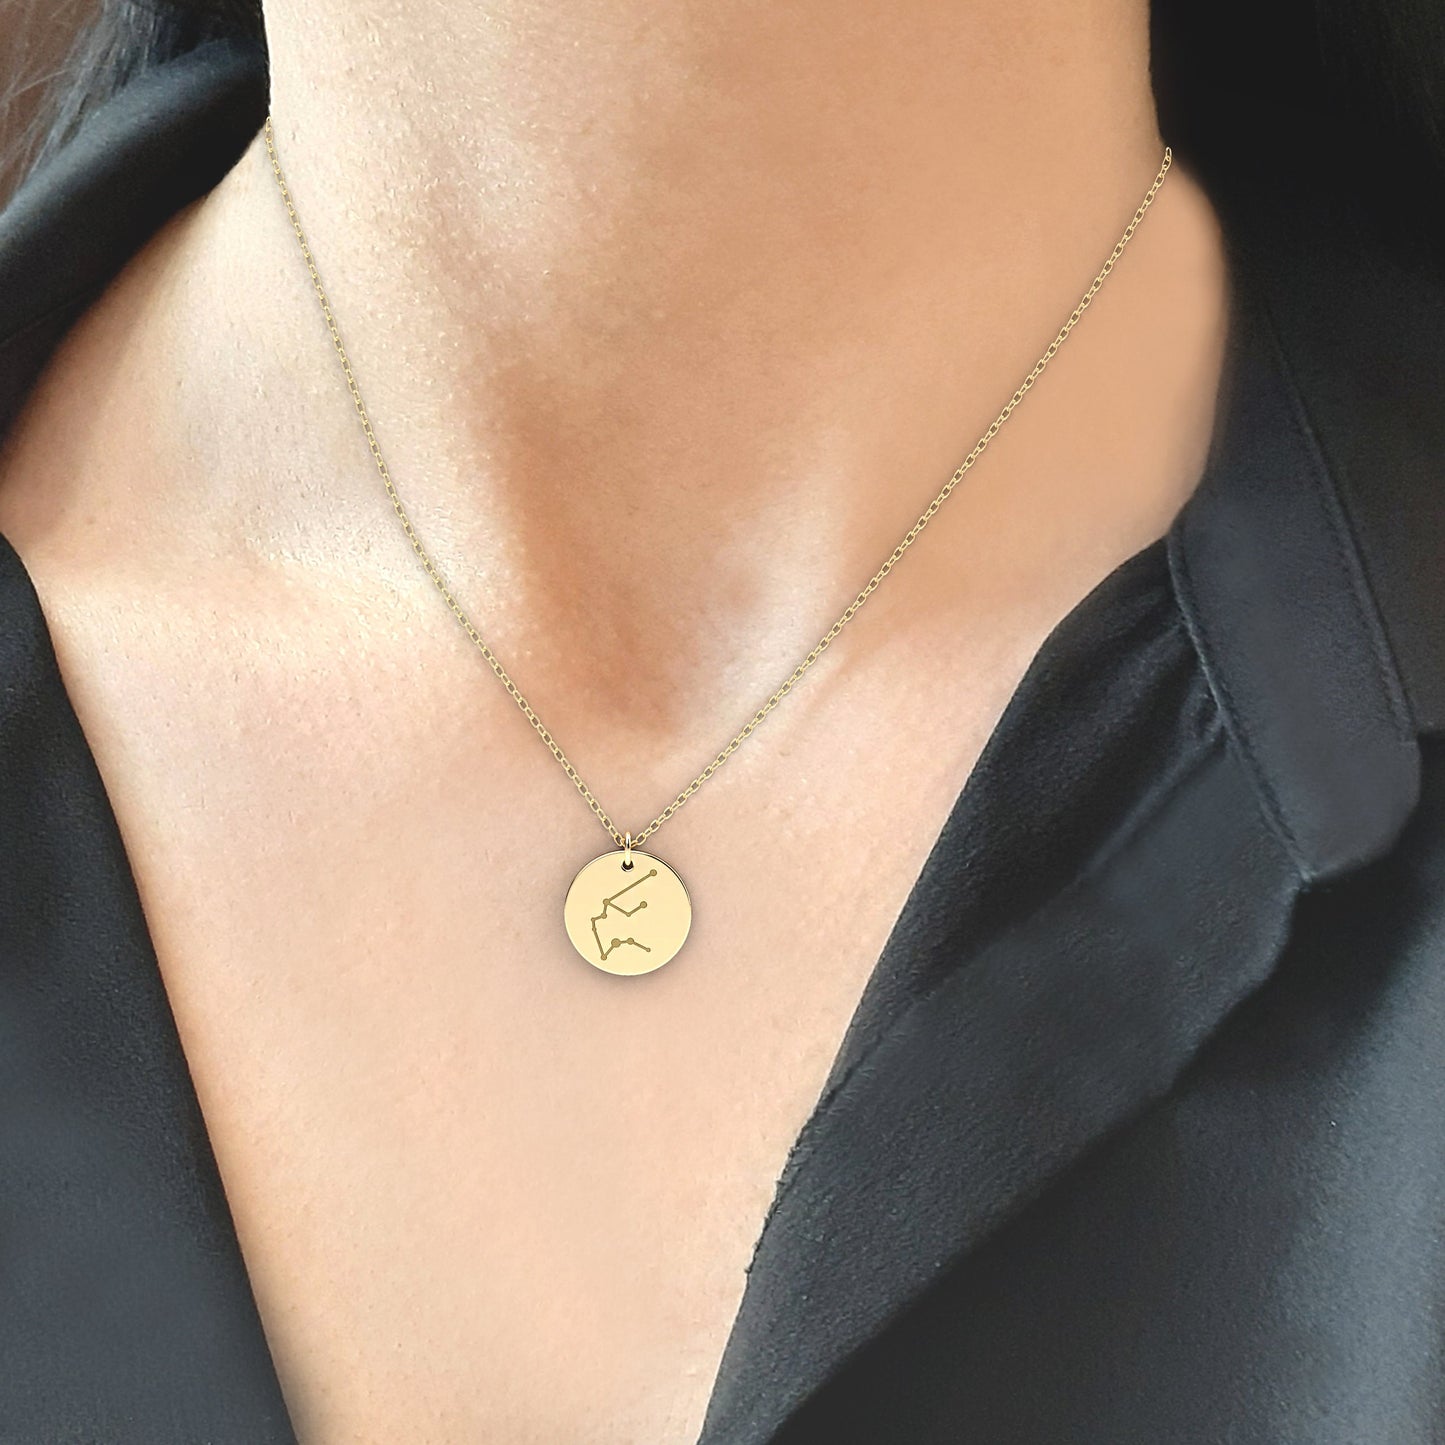 Large Constellation circle necklace in solid gold, Unique solid gold zodiac sign, Delicate disc zodiac, disc necklace, birthday gift